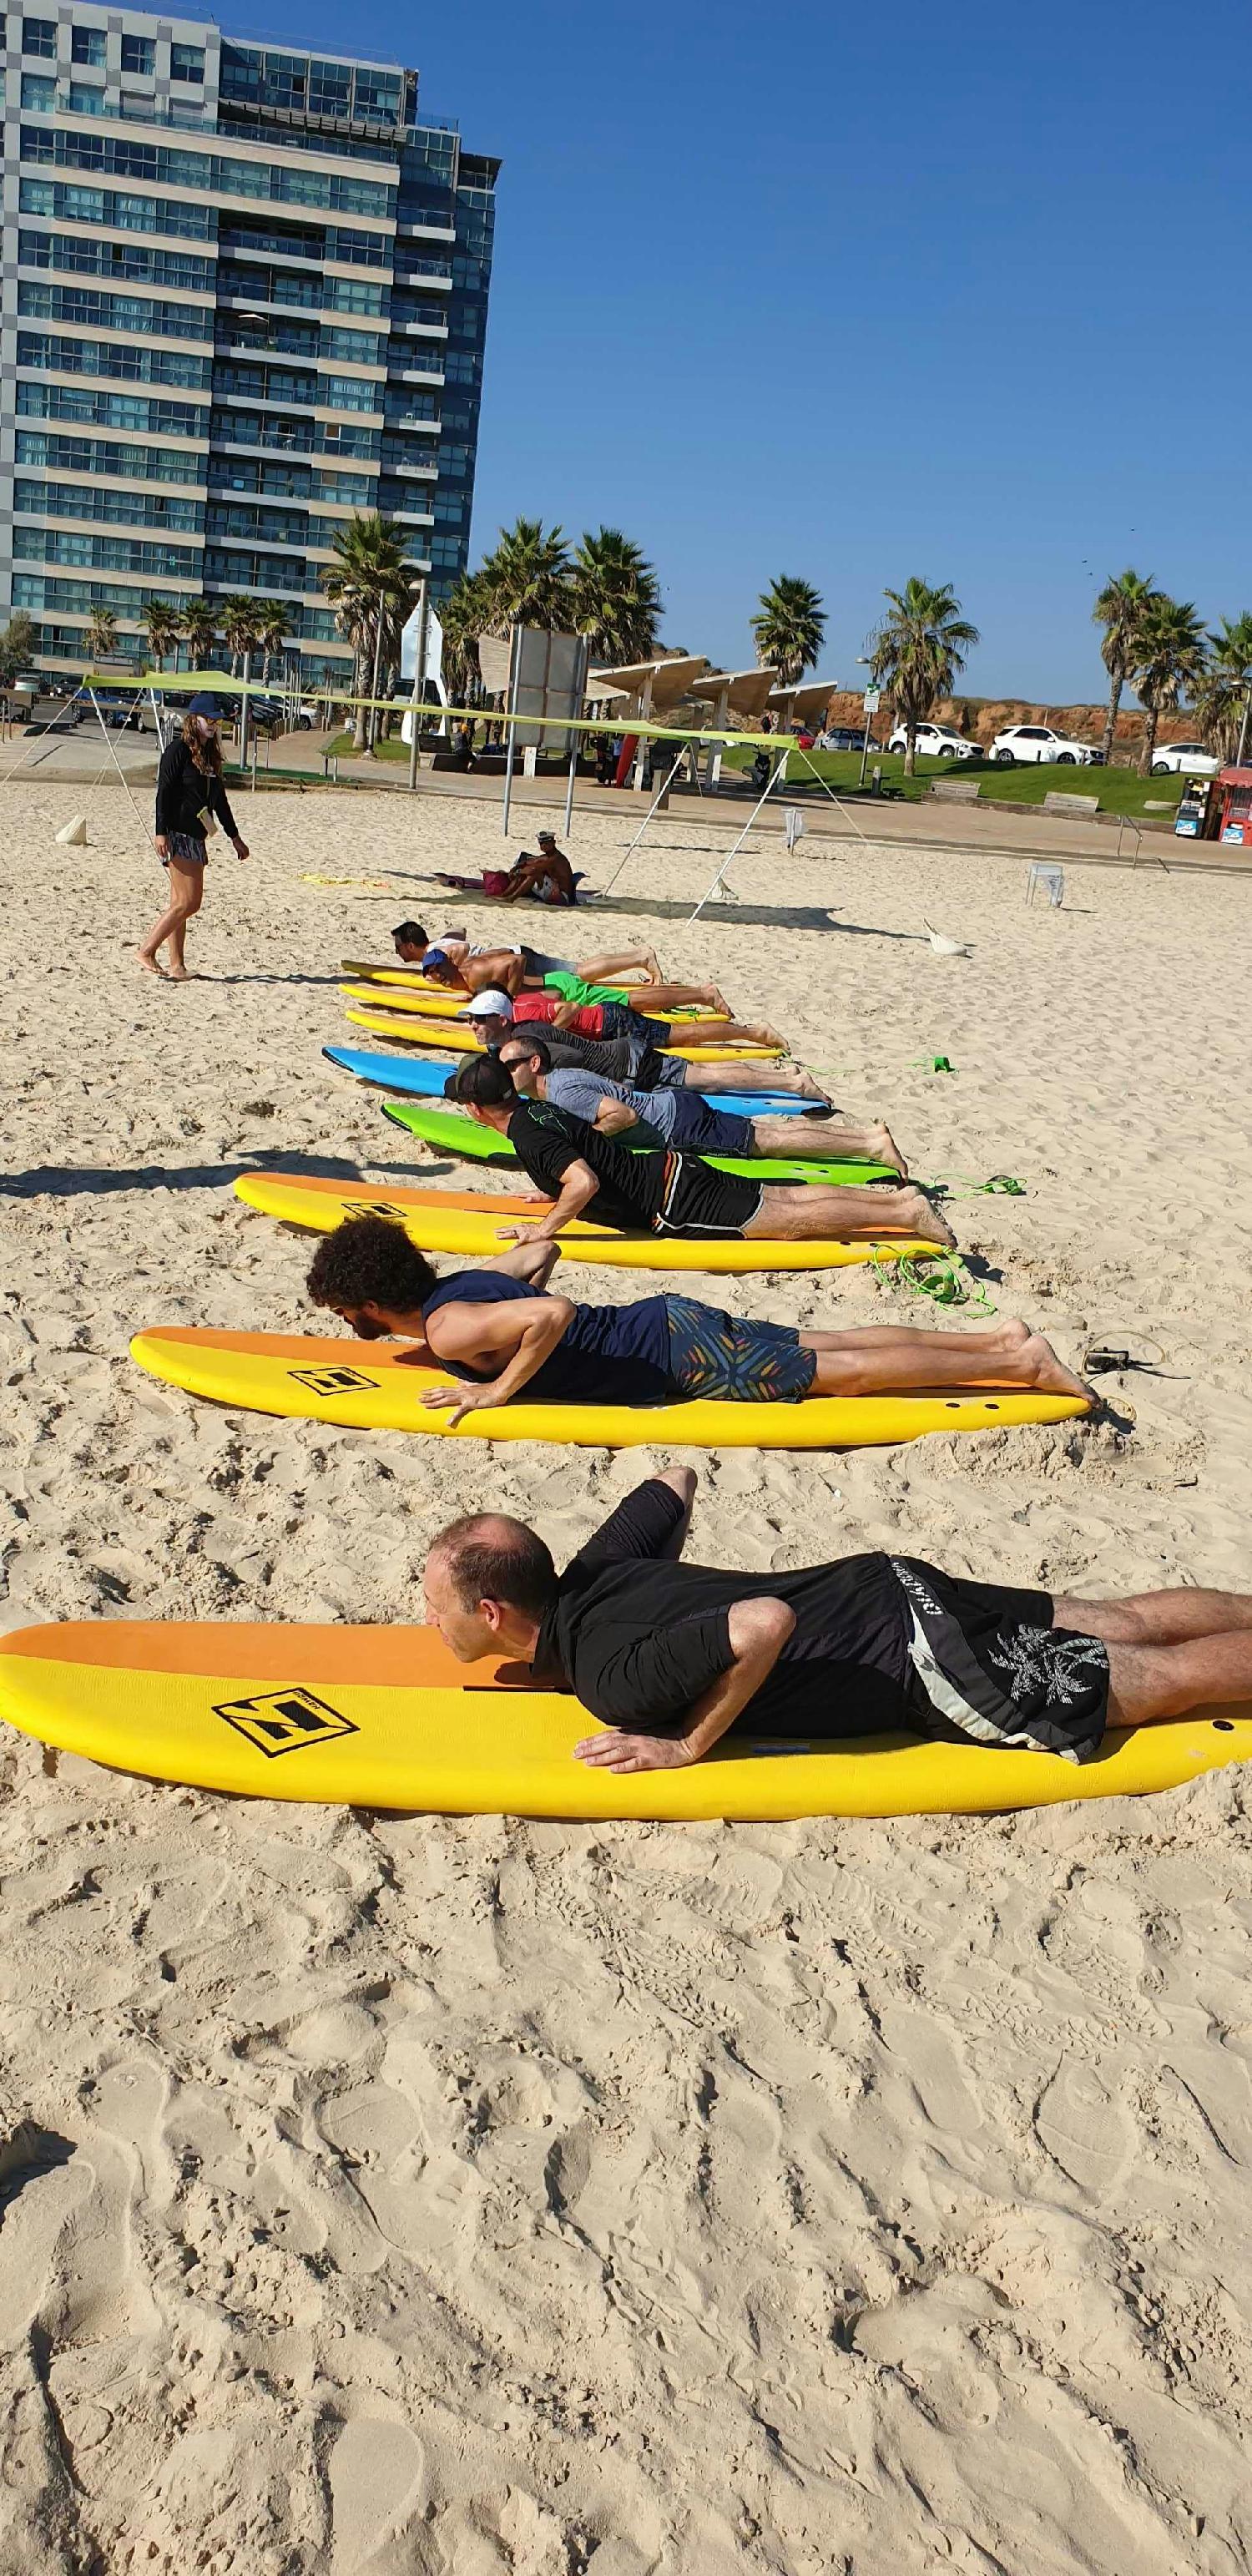 CB4's Israel team took group surfing lessons together